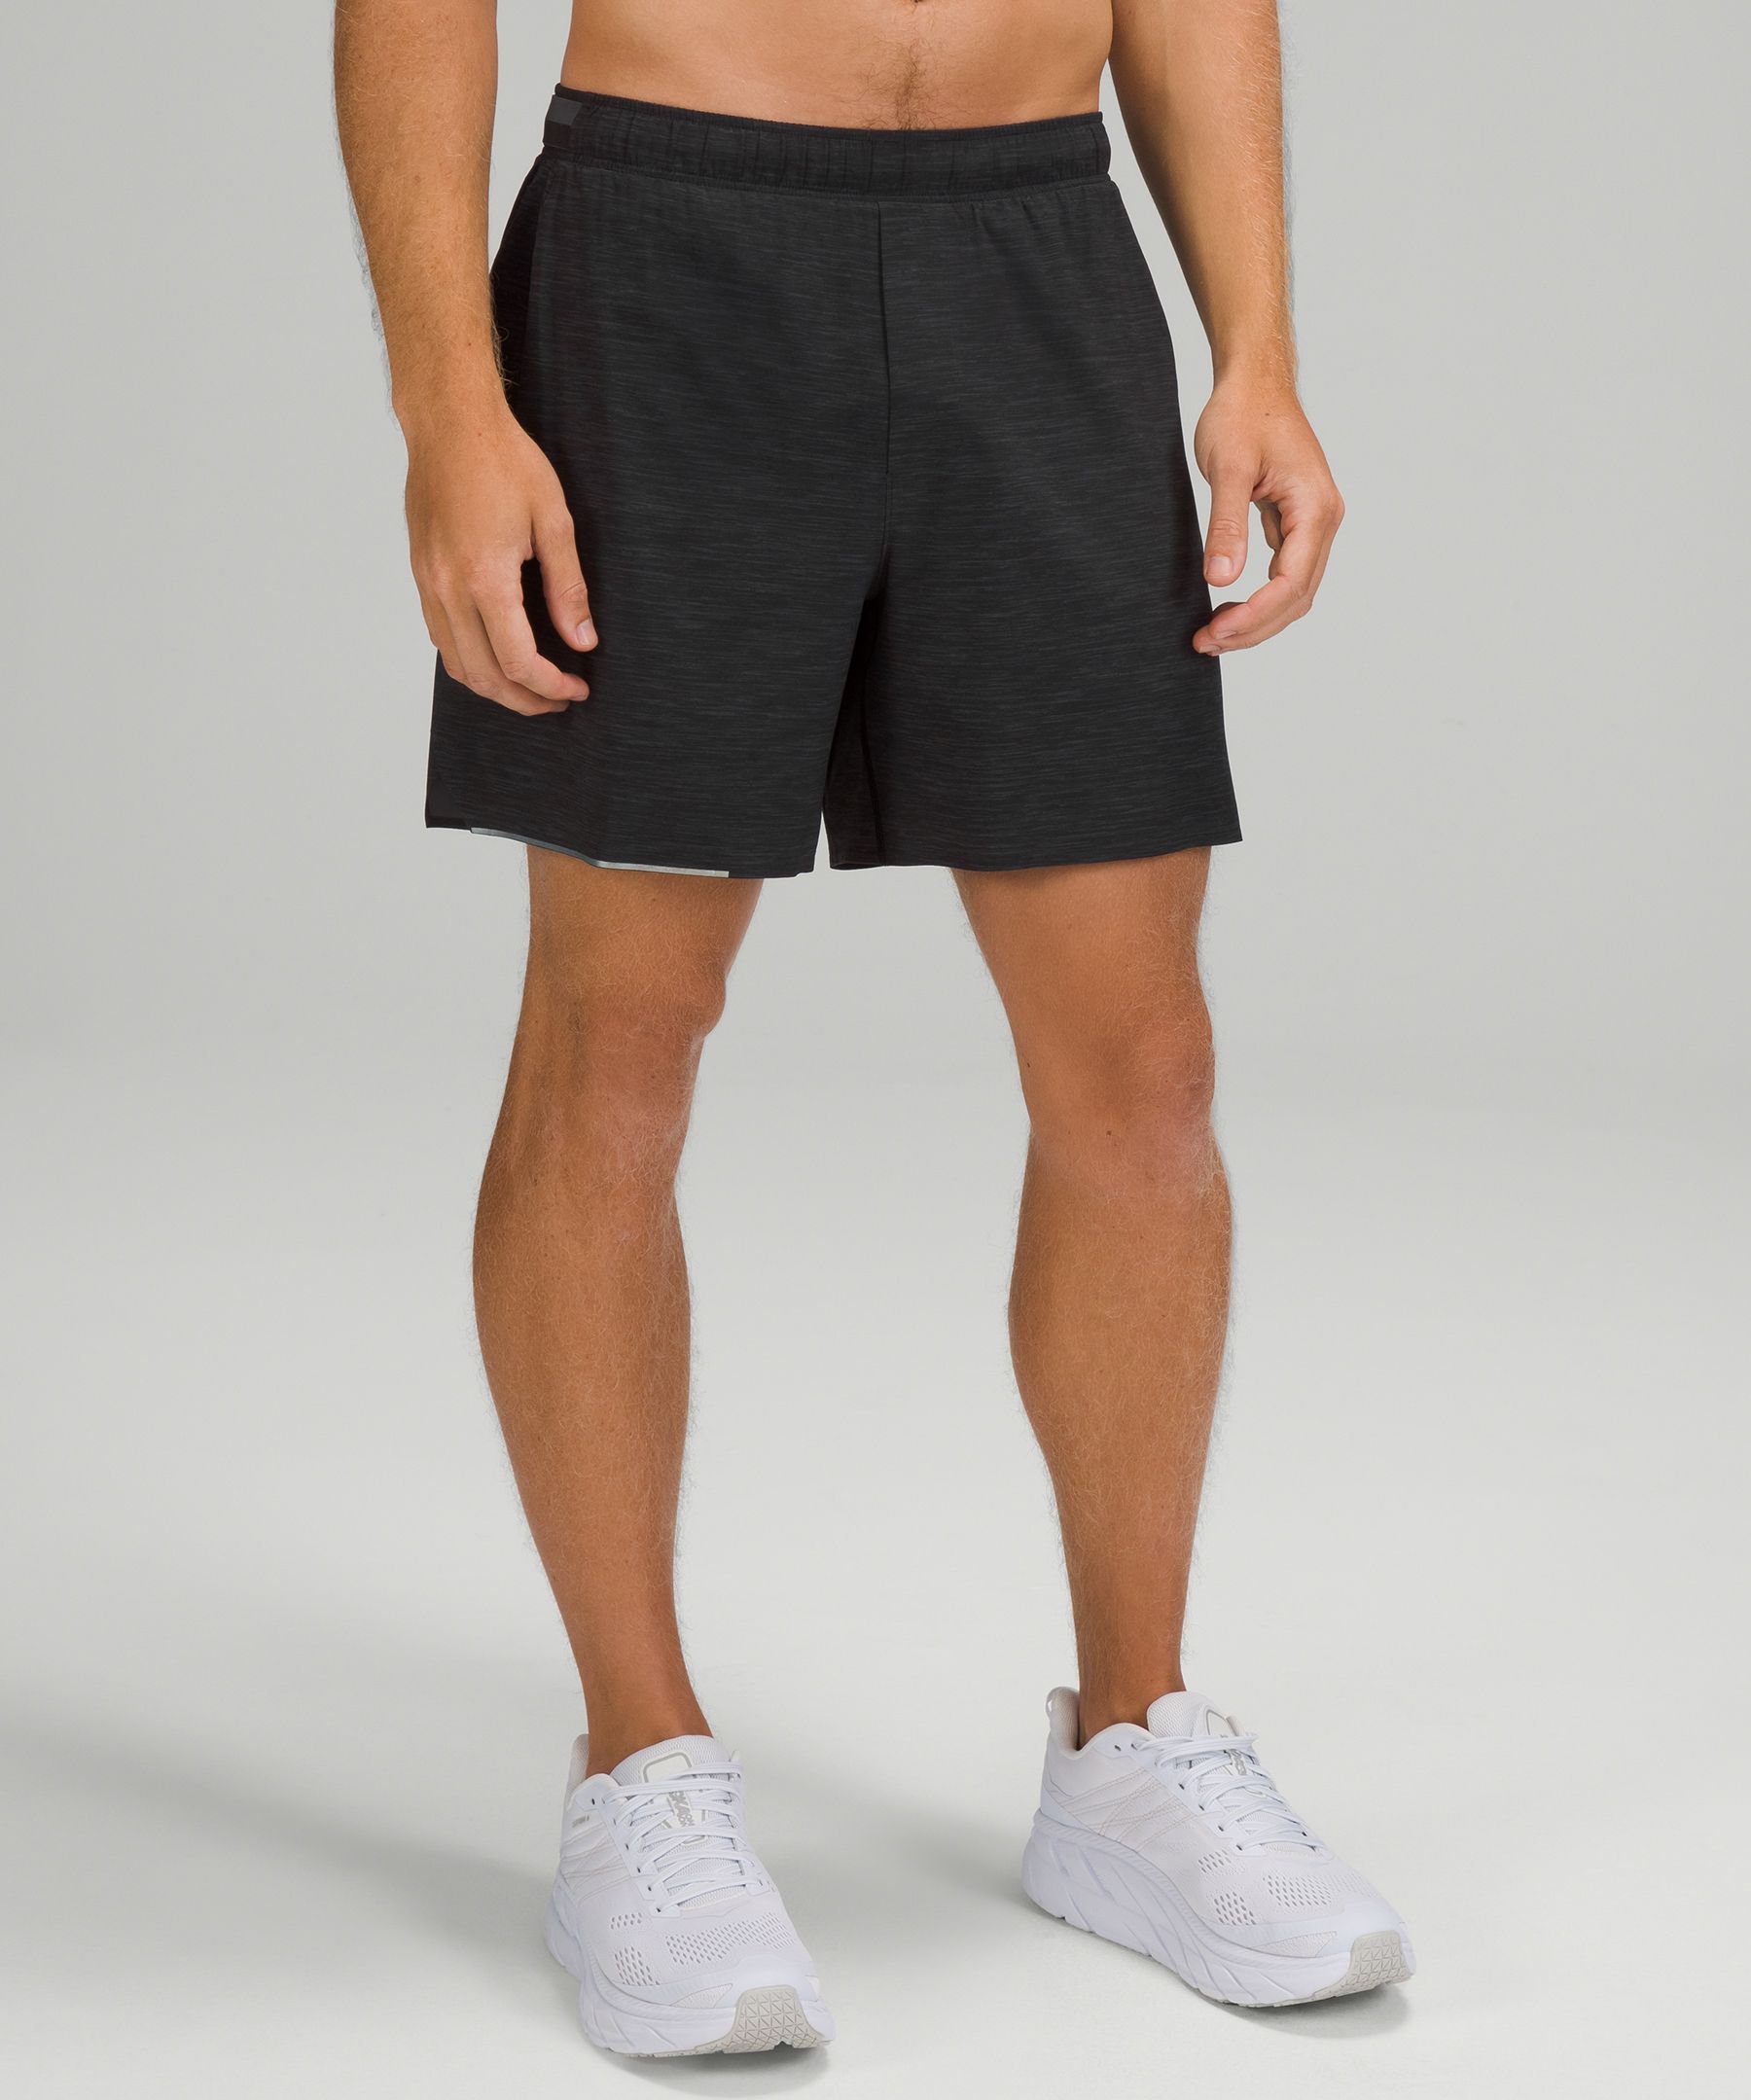 Lululemon Surge Lined Shorts 6" In Heather Allover Deep Coal Black